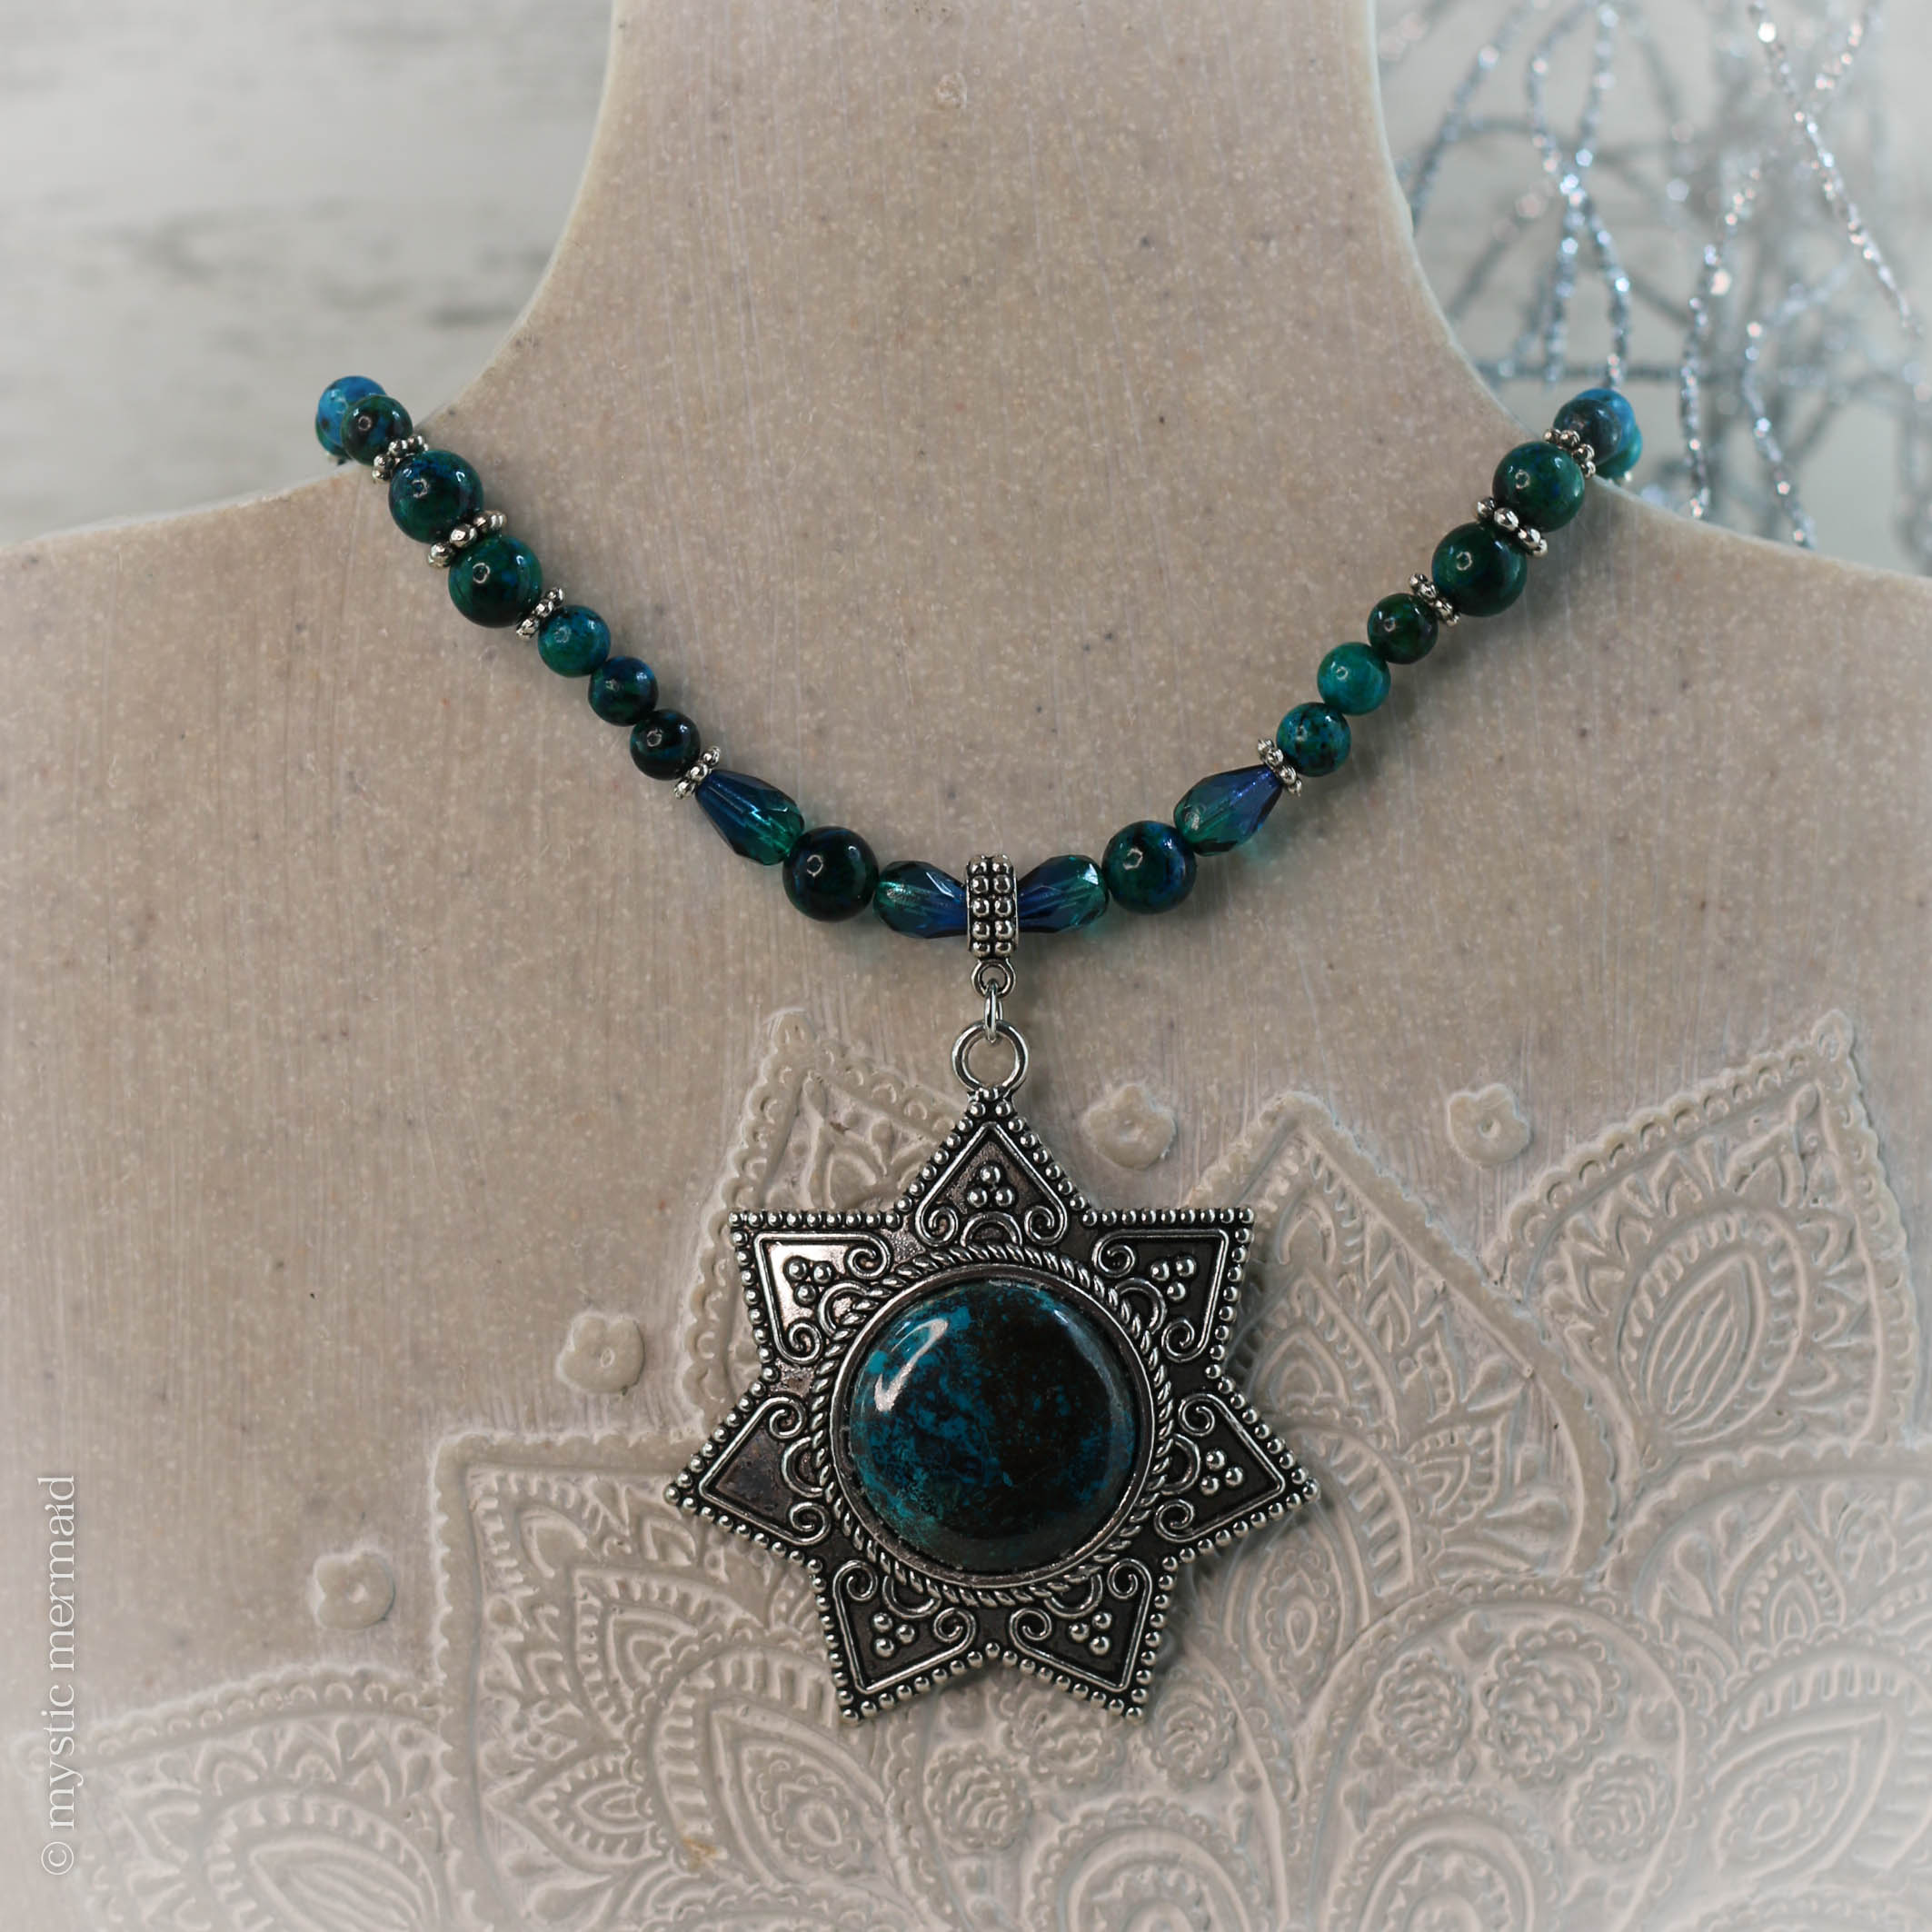 Express Yourself - Chrysocolla Necklace